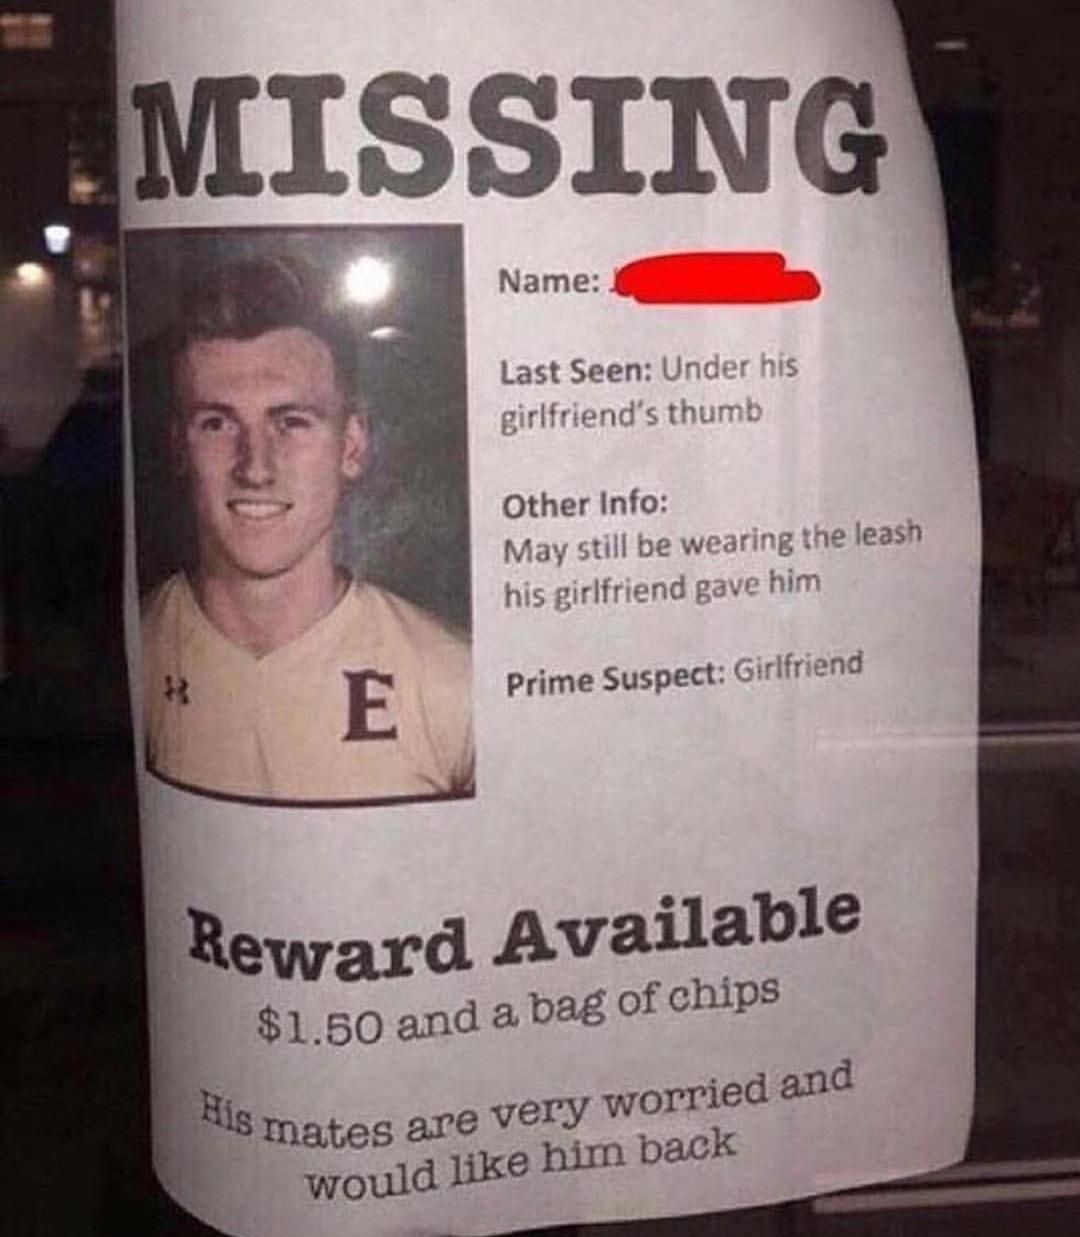 Please tell if you saw him recently